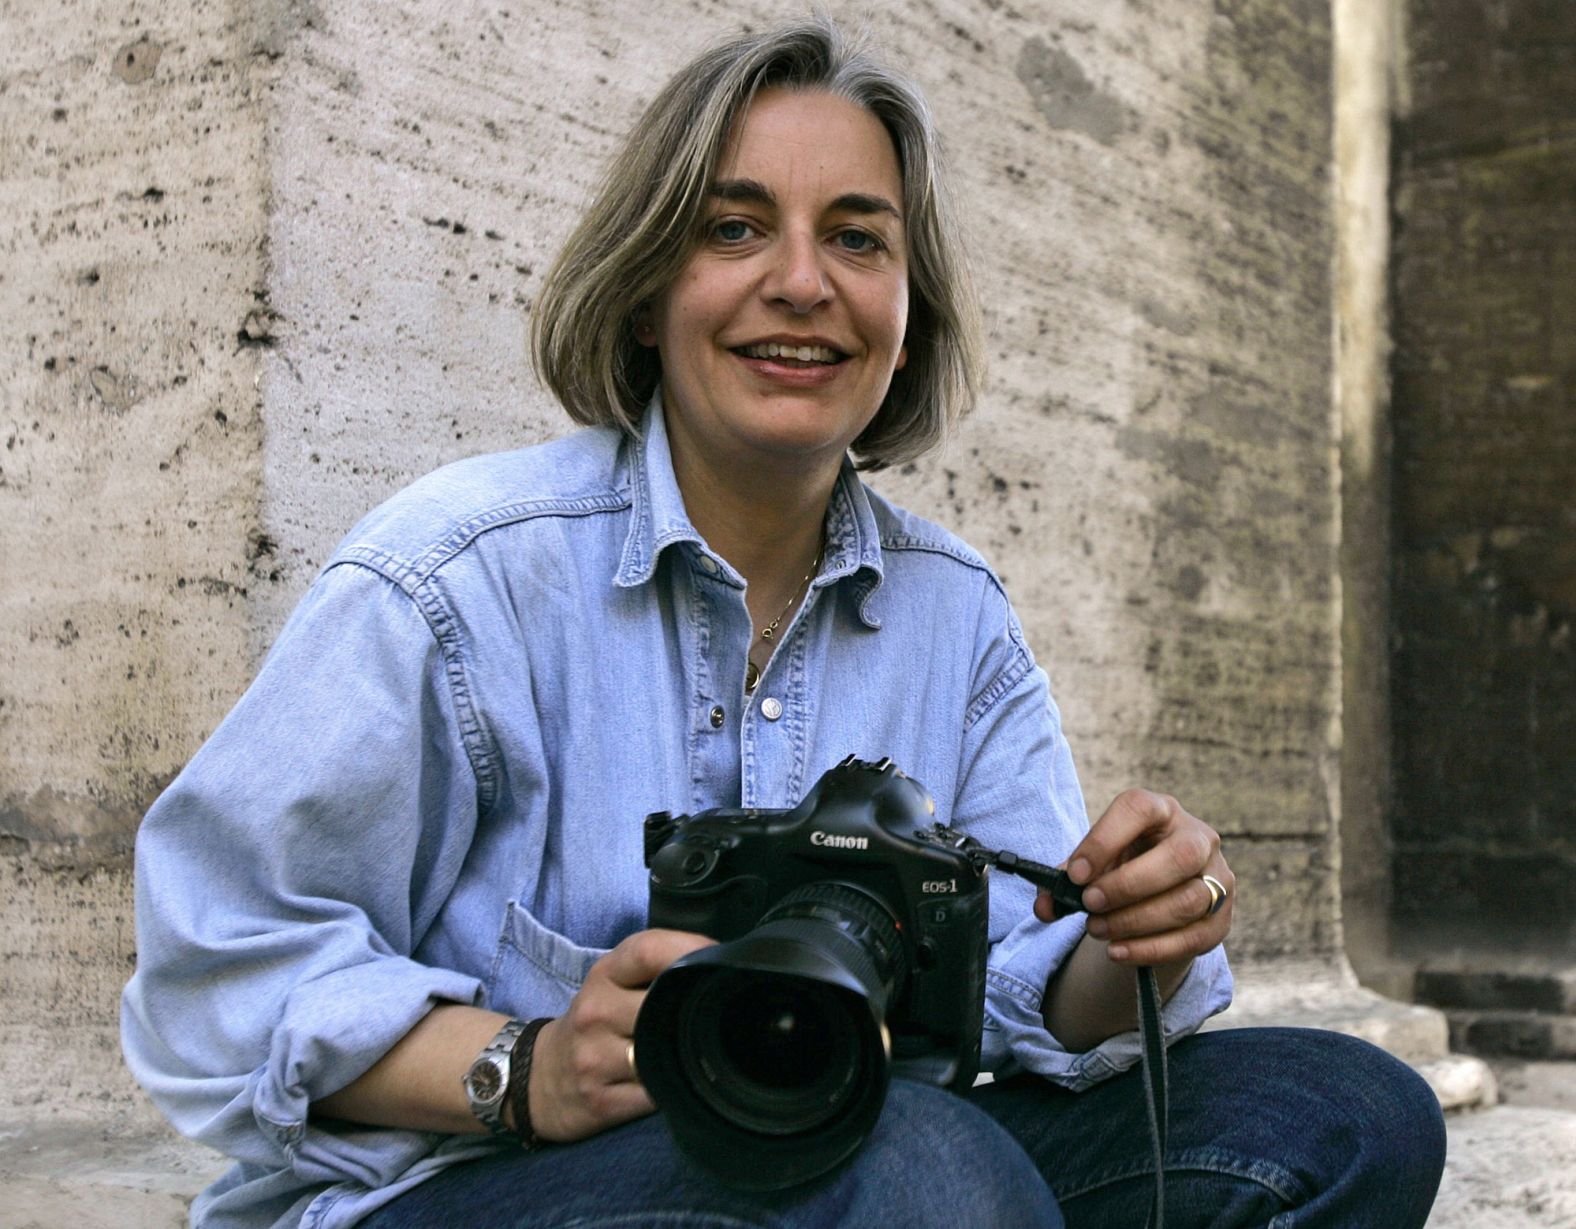 Anja Niedringhaus was a German photojournalist who worked for the Associated Press. She was killed in 2014 while covering Afghanistan's presidential election. An Afghan police officer opened fire on her and her colleague, Kathy Gannon, while they were waiting inside a car. Gannon survived the attack. "Anja showed a side of Afghanistan that few have ever seen. It's just a devastating loss," <a href="index.php?page=&url=https%3A%2F%2Ftime.com%2F3388127%2Fin-memoriam-anja-niedringhaus-1965-2014%2F" target="_blank" target="_blank">a colleague told Time magazine</a>. Before Afghanistan, Niedringhaus worked in many conflict zones and spent a decade covering the wars in the former Yugoslavia. Santiago Lyon, who was the AP's vice president and director of photography, said Niedringhaus "consistently volunteered for the hardest assignments and was remarkably resilient in carrying them out time after time. She truly believed in the need to bear witness."